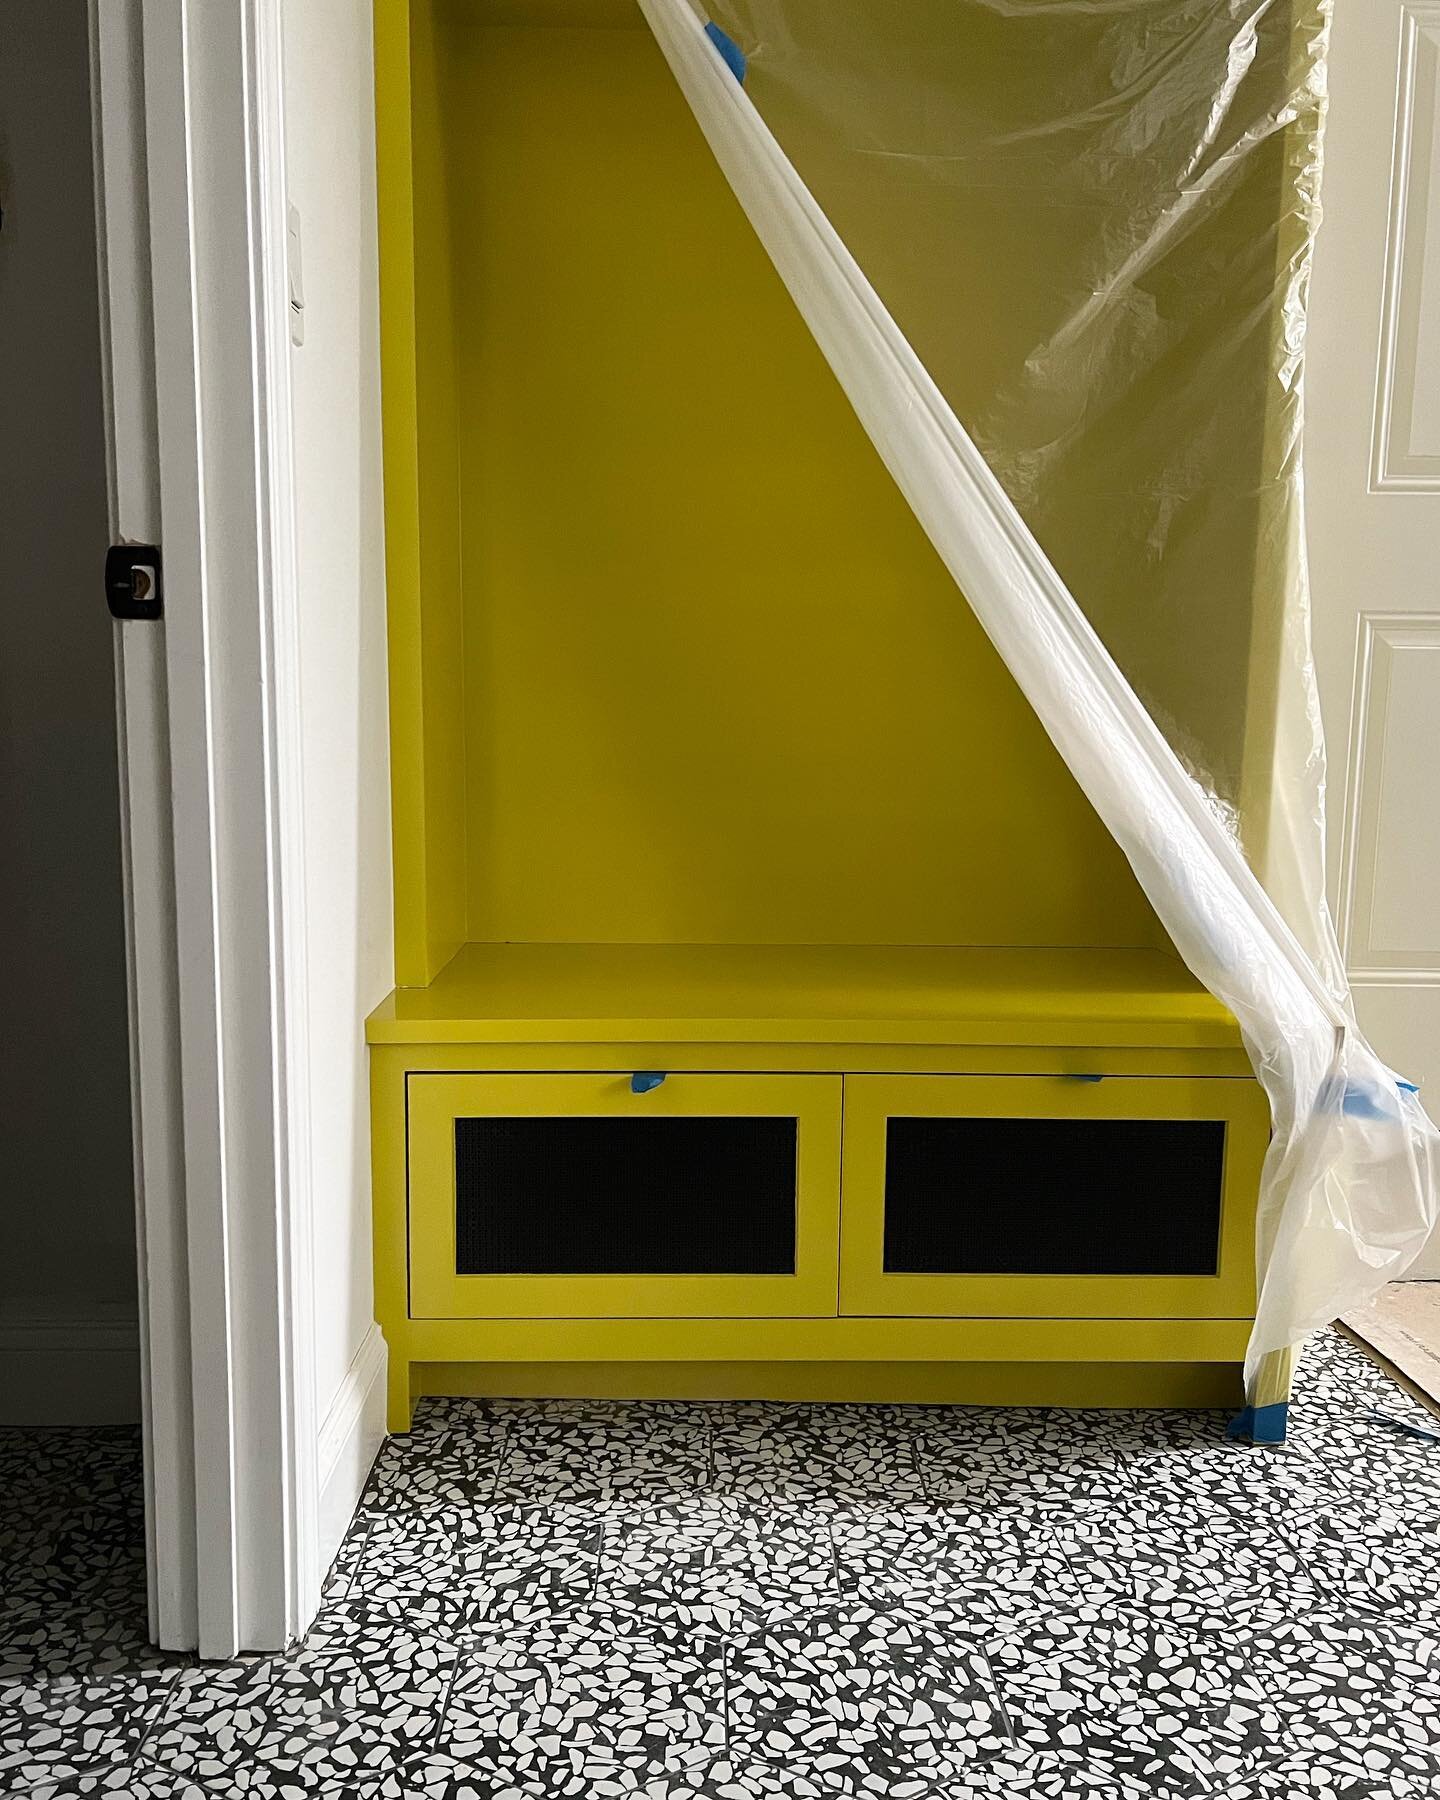 Job site check in and here&rsquo;s some mudroom fun on #tiletuesday Chartreuse on black and white terrazzo, now that&rsquo;s 🔥
@nina_seed_interiors 
#ilovemyclients 
.
.
.
.
#interiors #interiordesign #design #decor #renovation #bostondesign #neweng